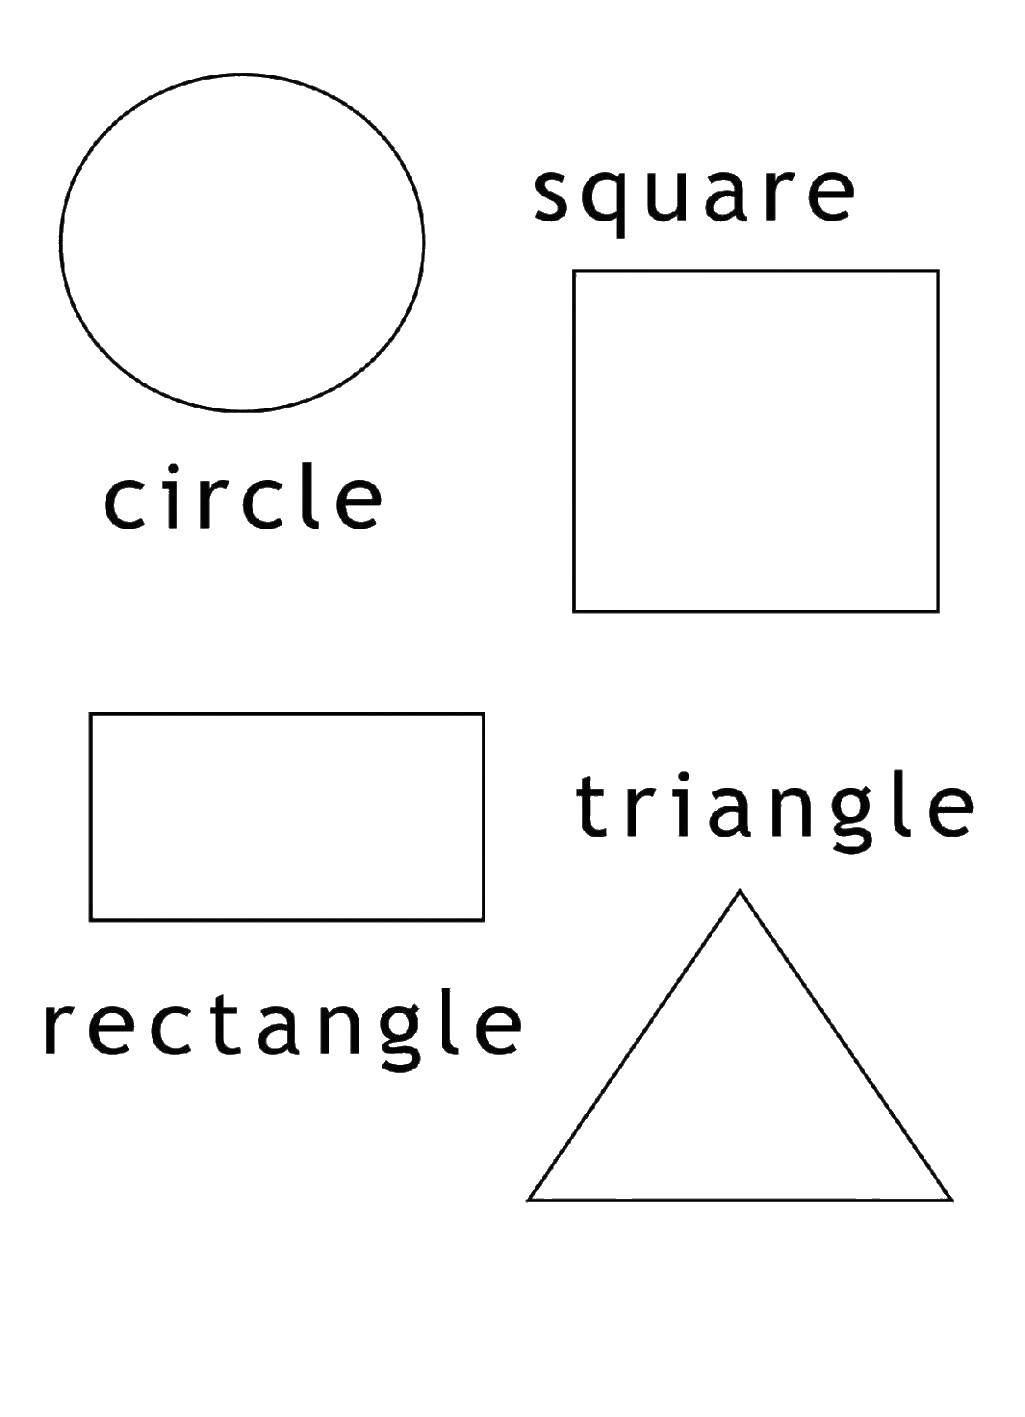 Coloring Round, square, rectangle, triangle. Category shapes. Tags:  circle, square, rectangle, triangle, shapes.